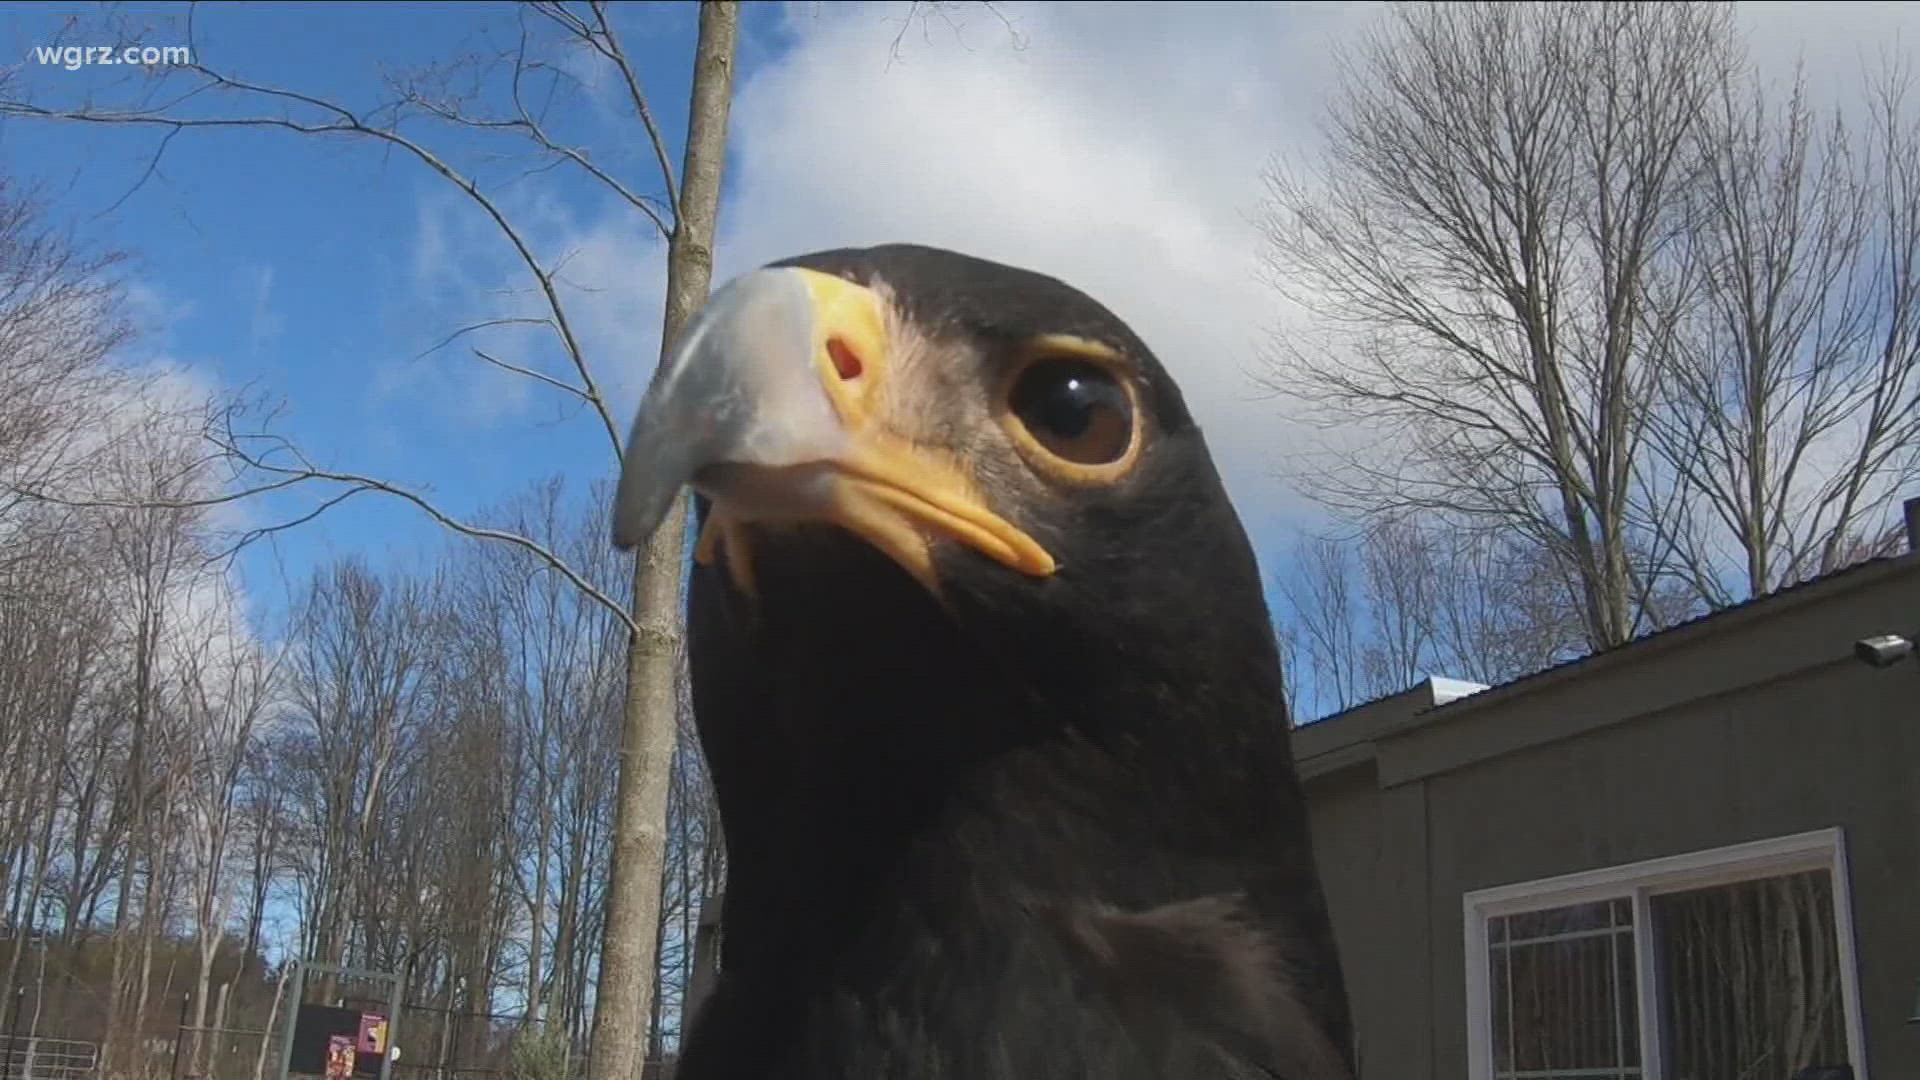 Hawk Creek Wildlife Center is working with other groups to conserve Eagles worldwide.